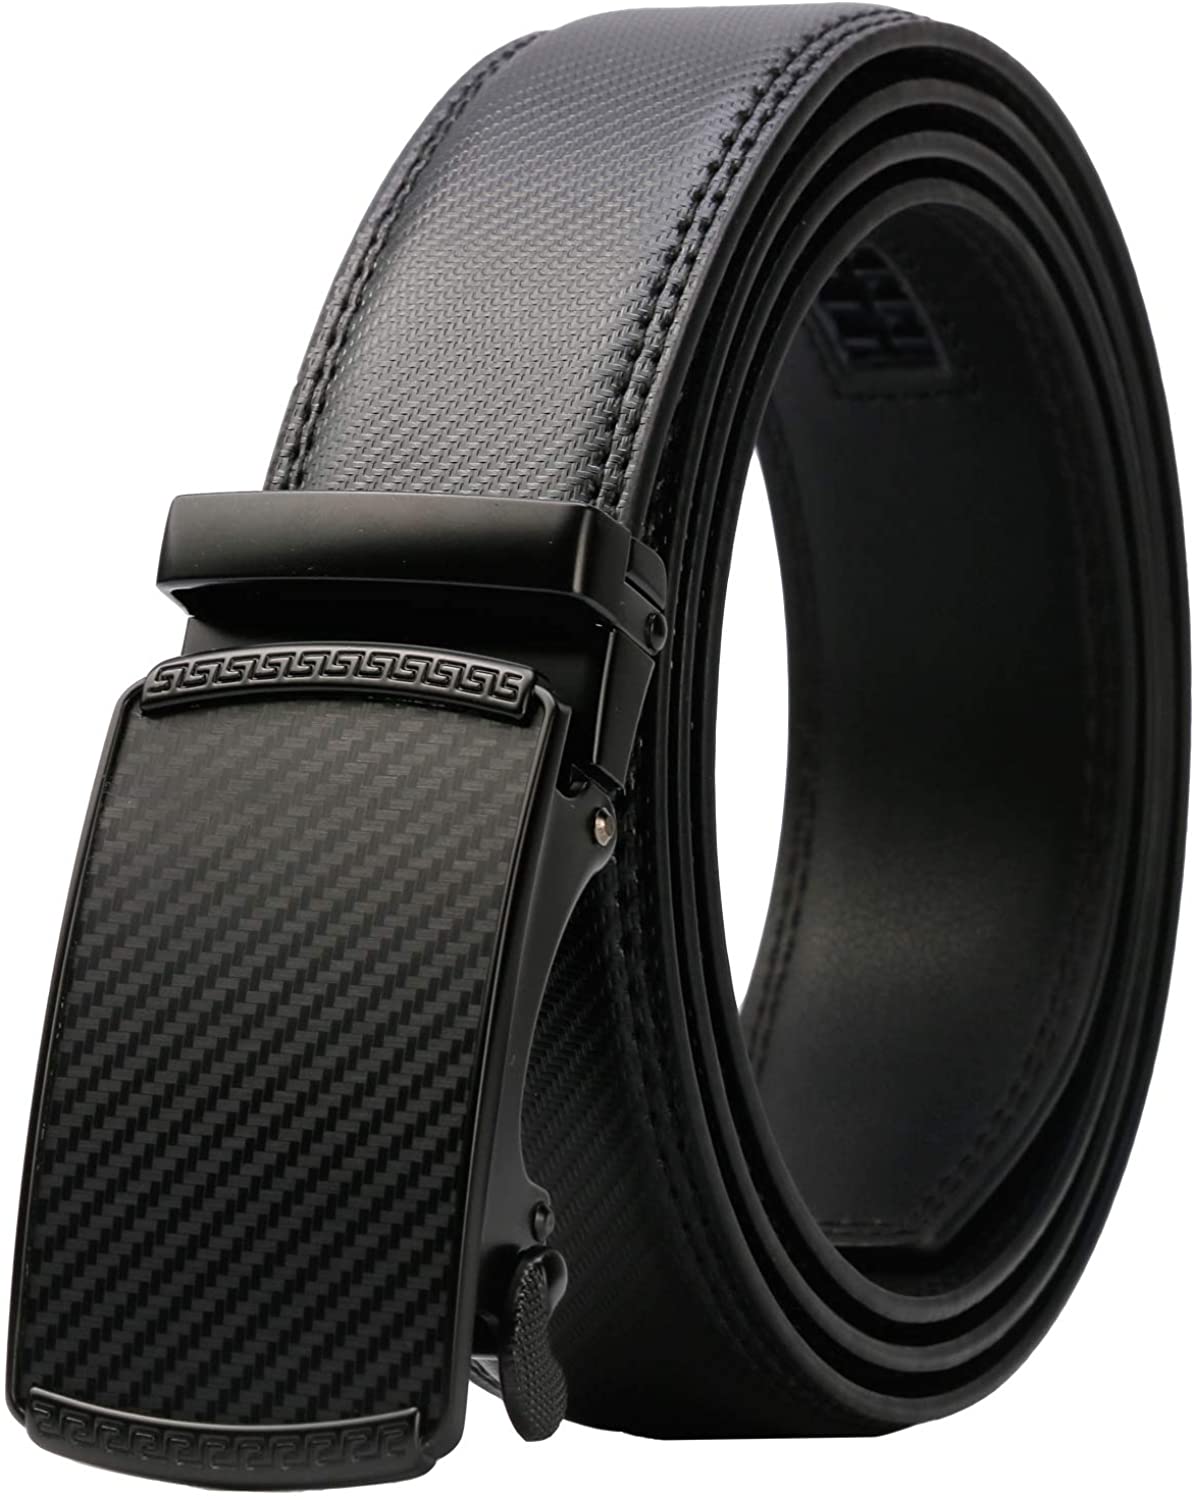 Lavemi Men's Real Leather Ratchet Dress Belt with Automatic Buckle ...